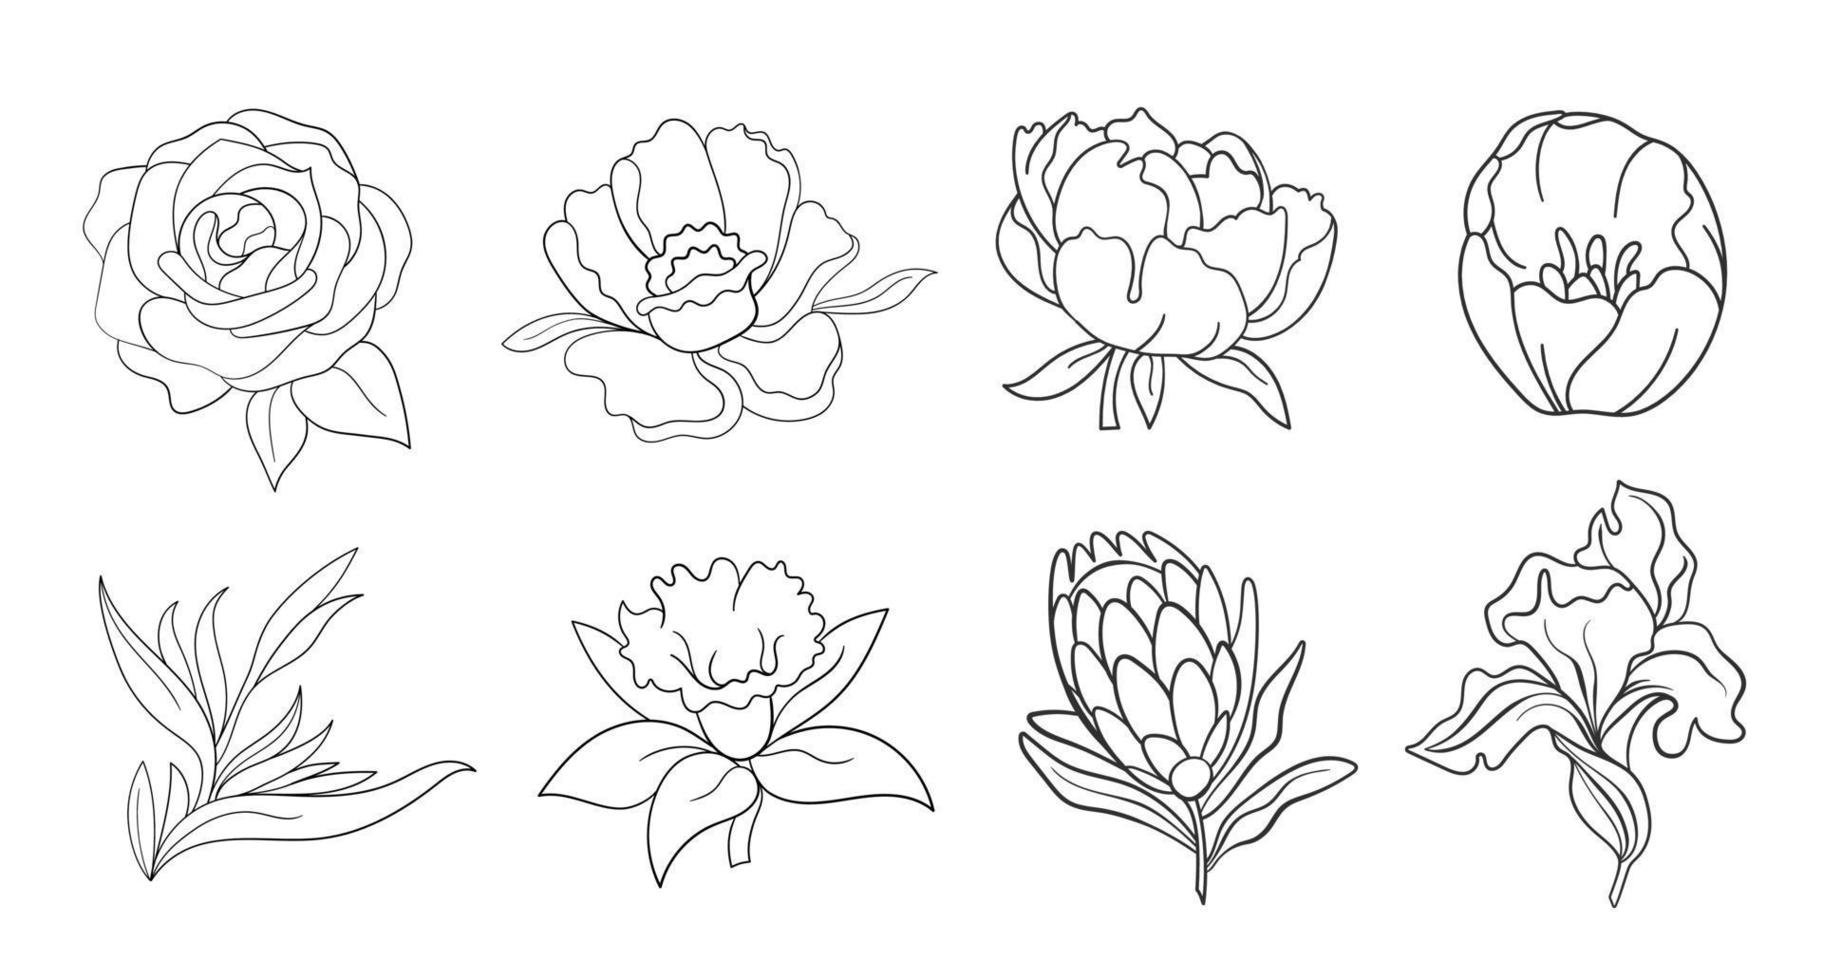 Vector one line black illustration graphics flowers set on white isolated background